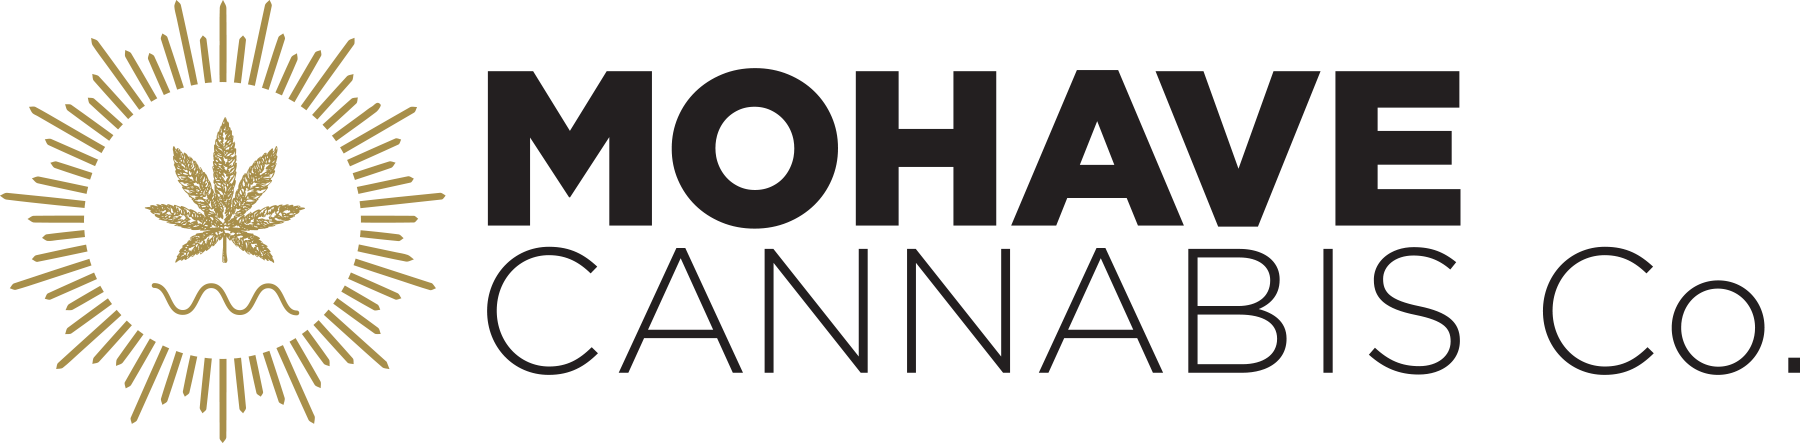 Mohave Cannabis Co.